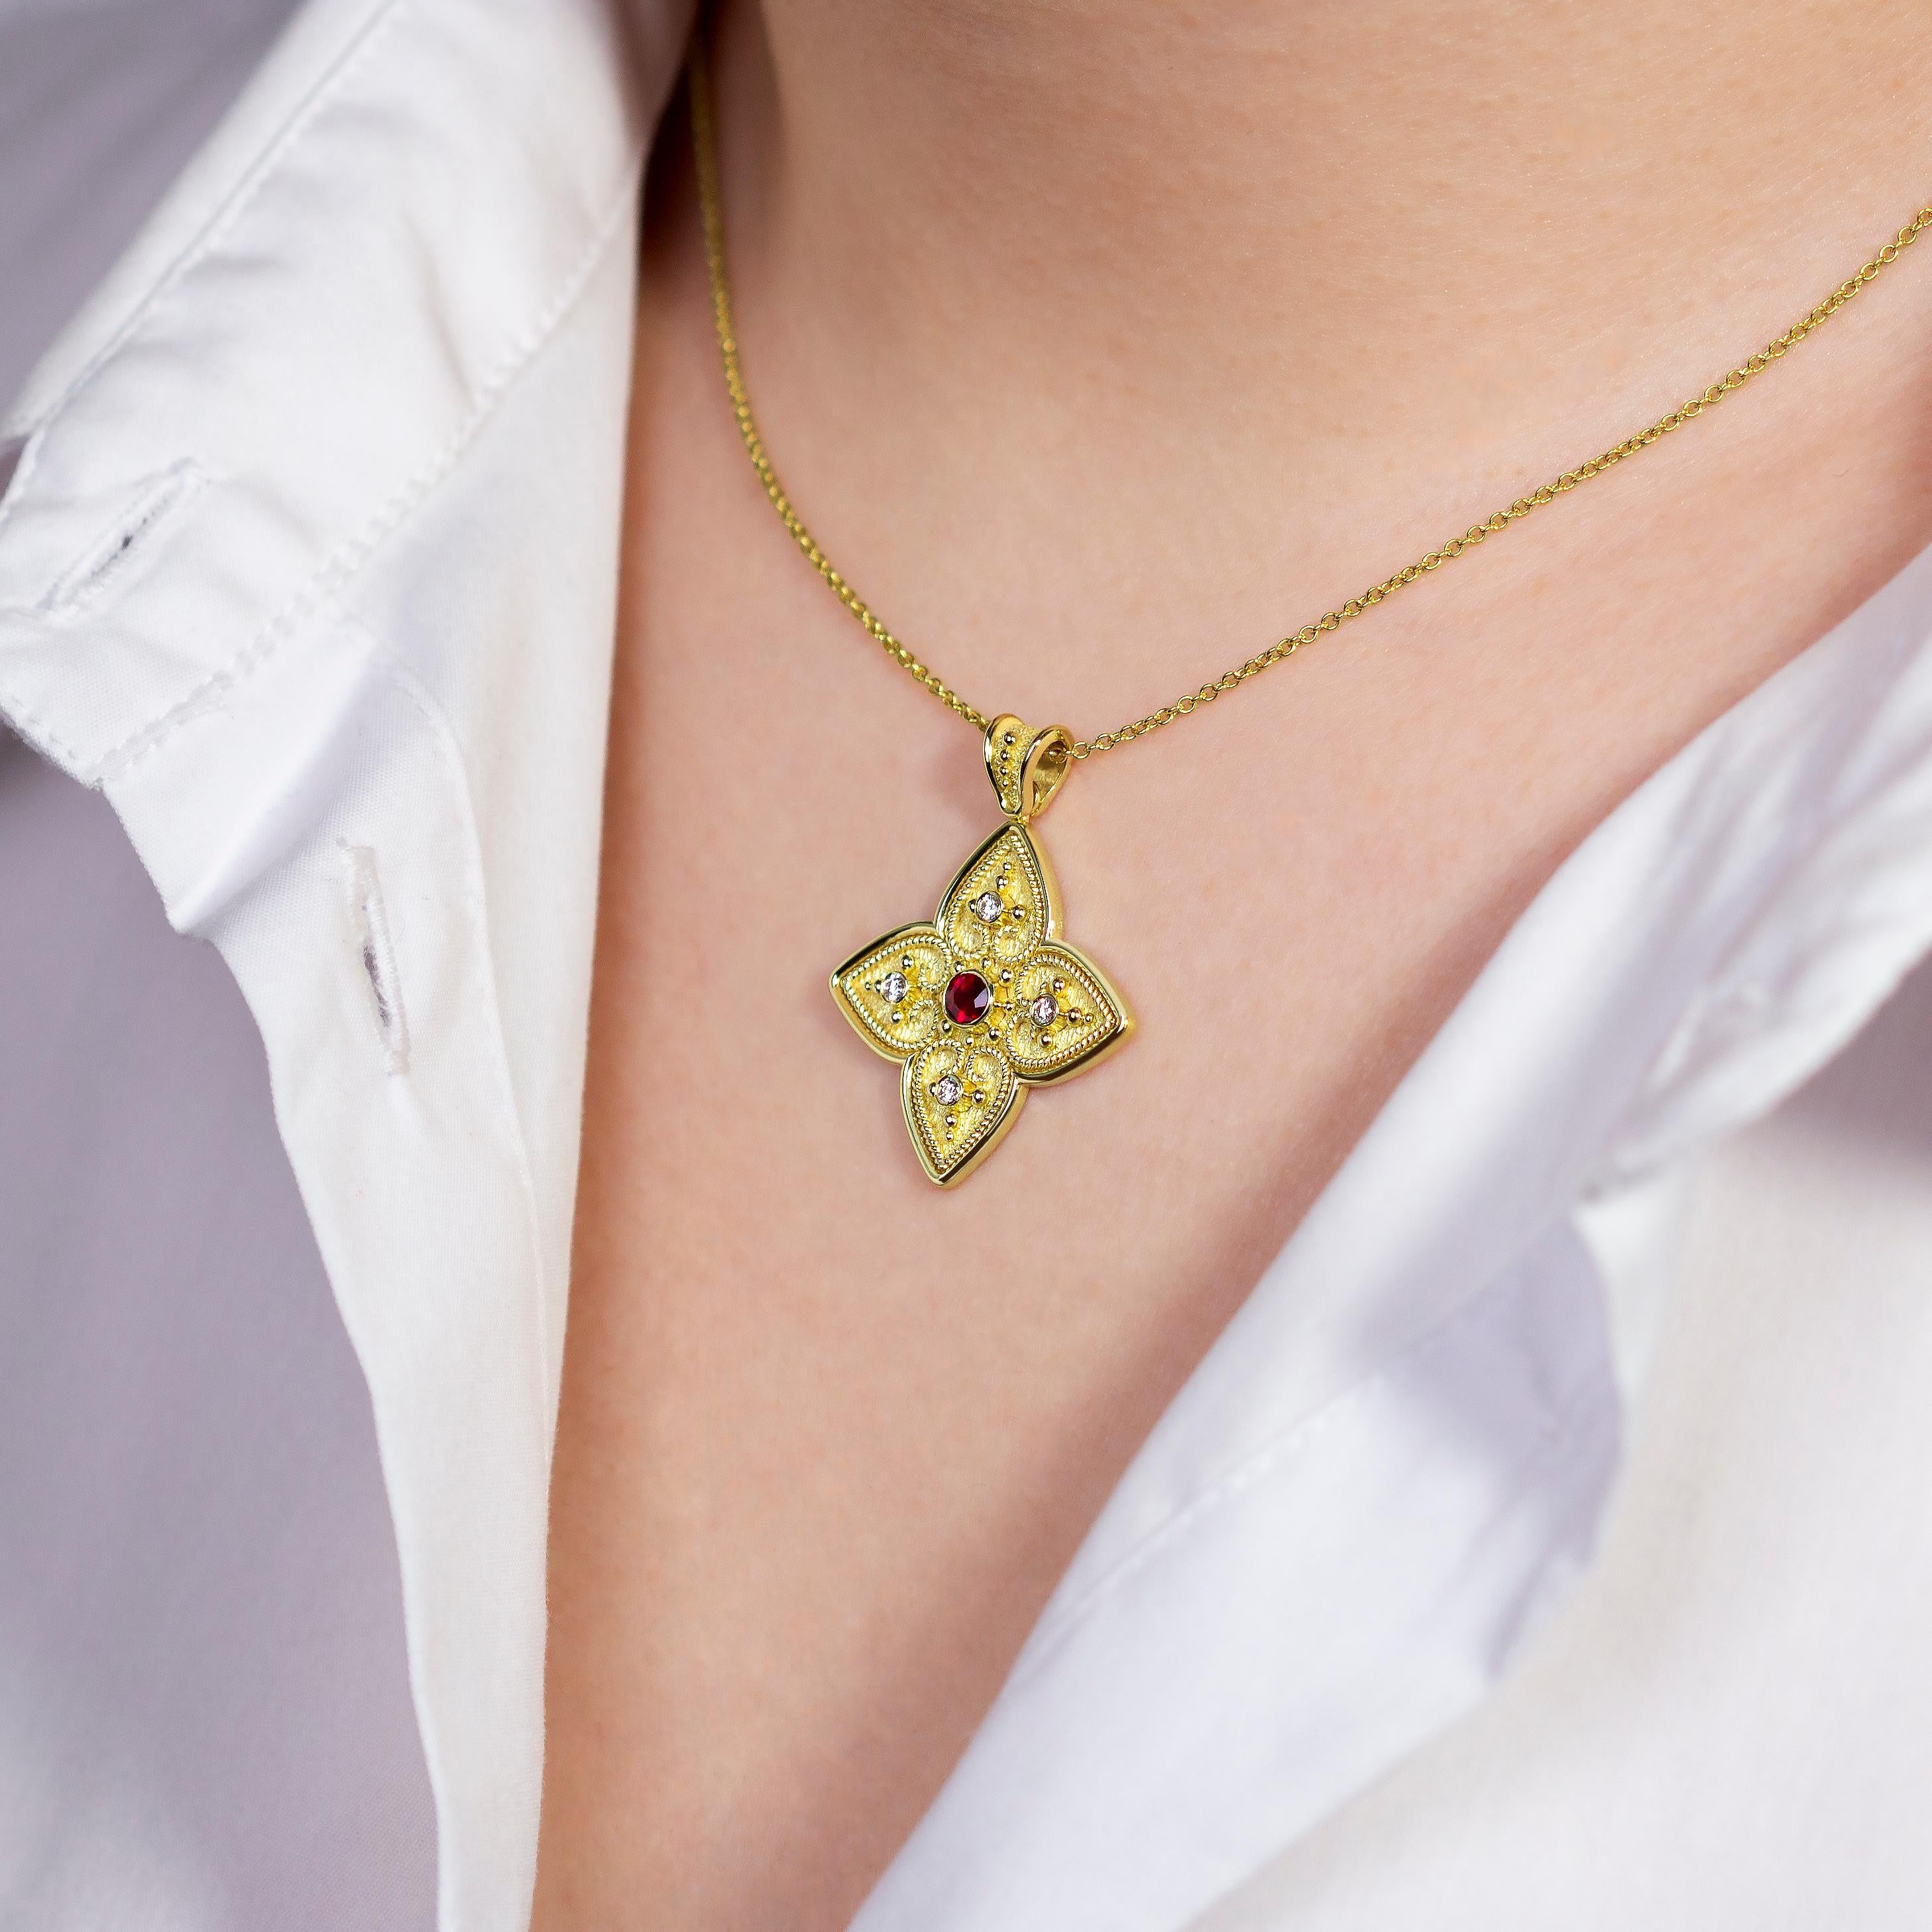 Our unique gold cross pendant blooms with a captivating flower design, where heart-shaped petals cradle a single diamond each, all centered around a radiant ruby. A symbol of love and faith in full bloom.

100% handmade in our workshop.

Metal: 18K